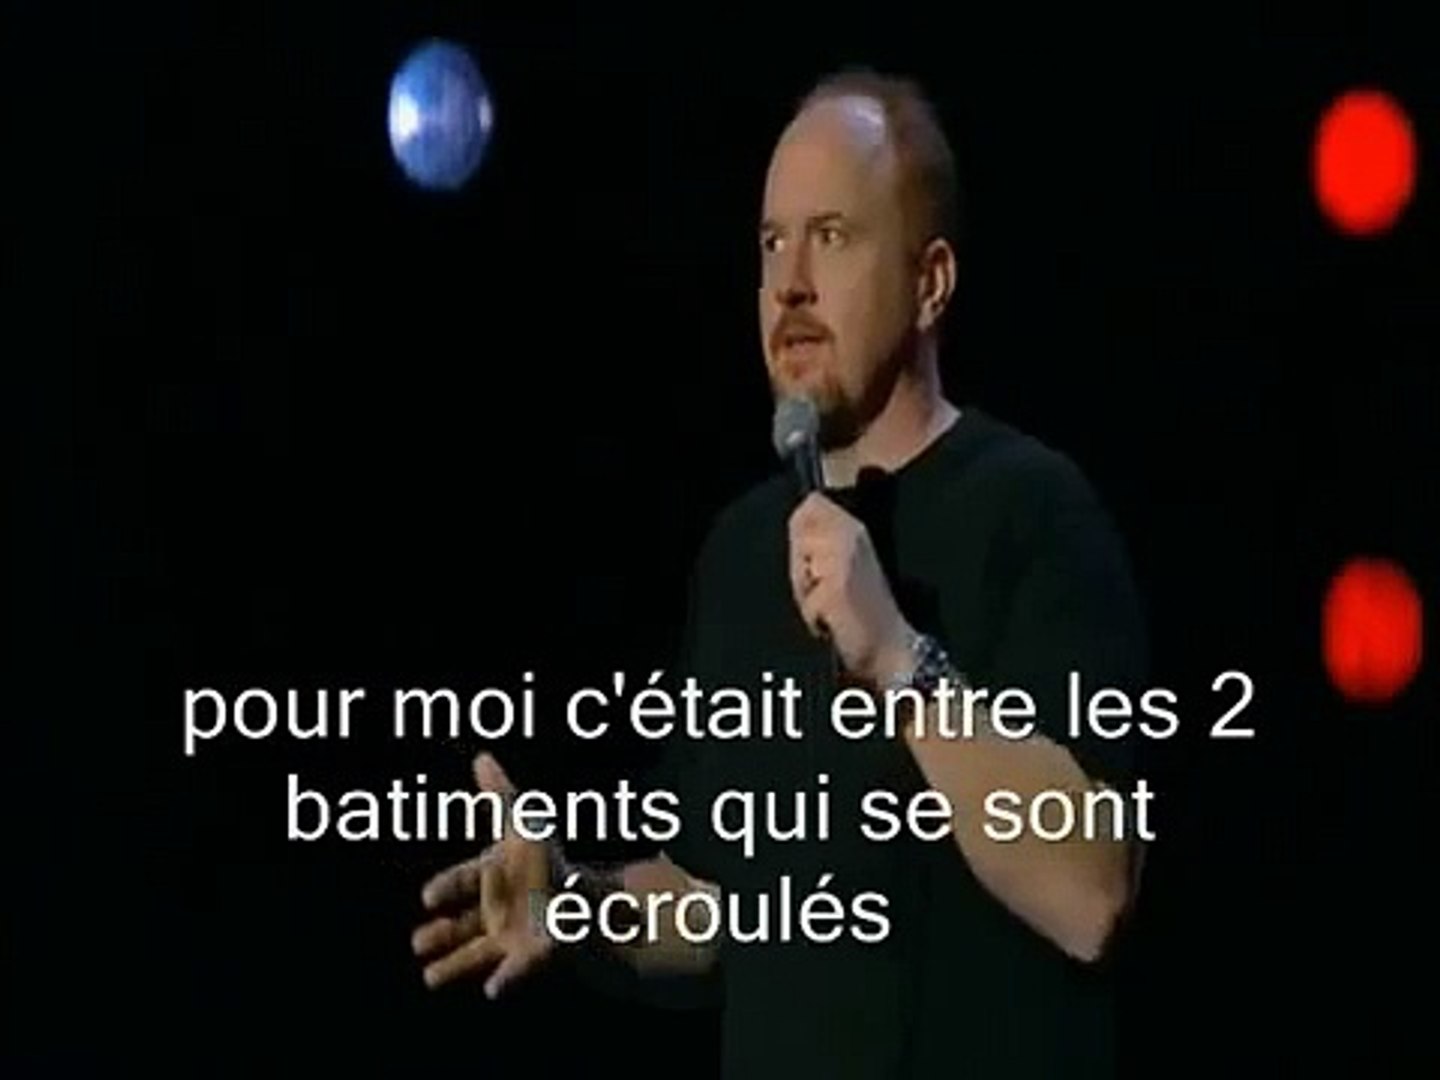 Louis C.K. : Chewed Up - Stand Up Comedy Full Show - video Dailymotion